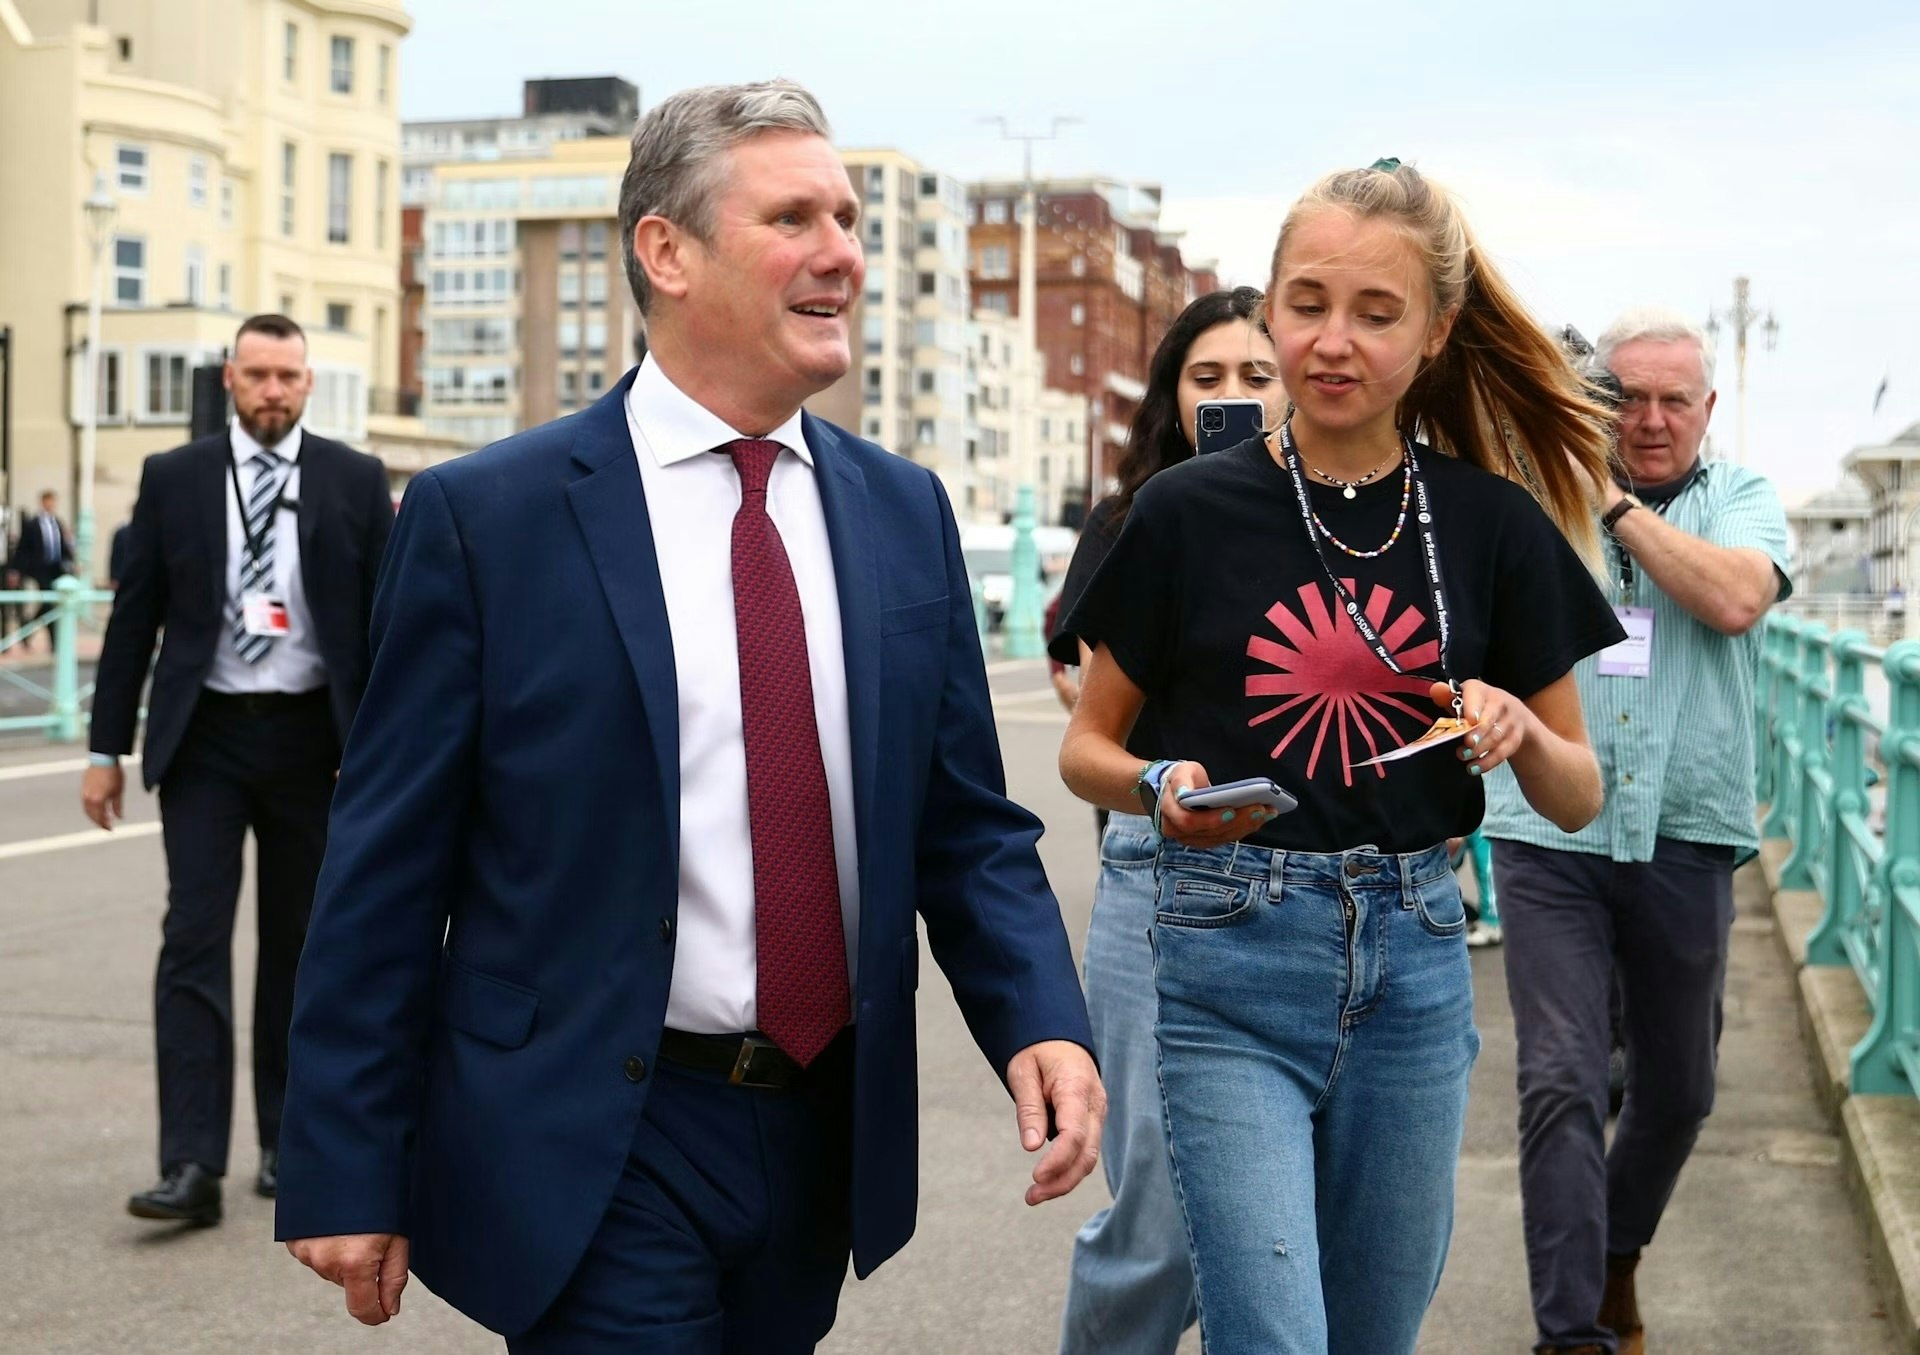 I interrupted Keir Starmer’s manifesto launch – here’s why